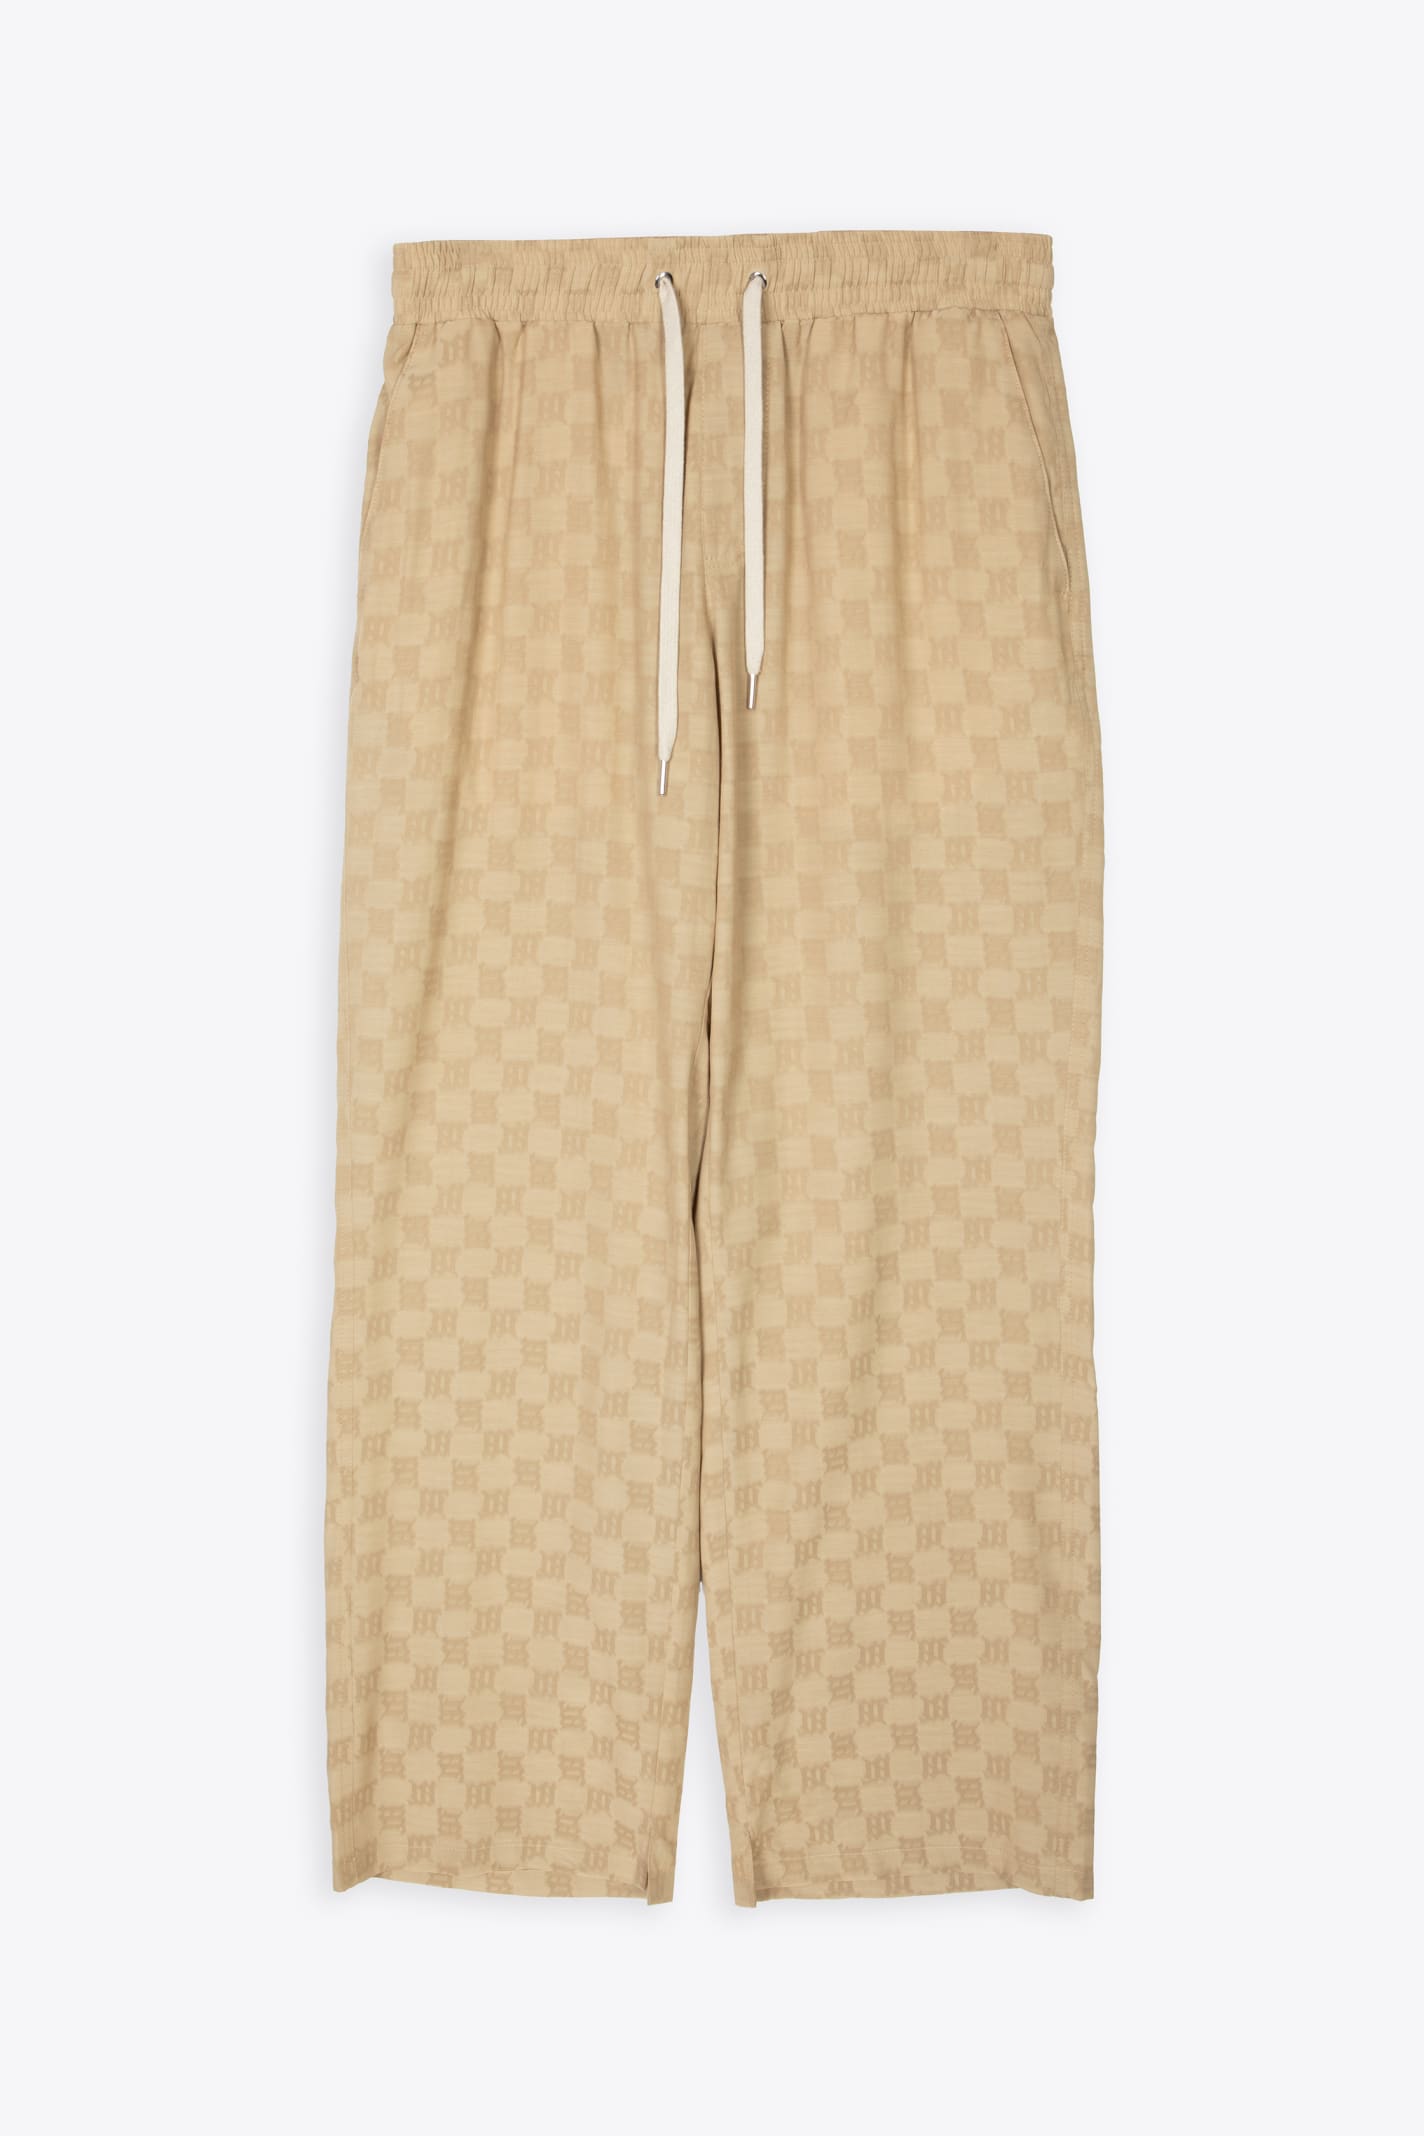 MISBHV MONOGRAM VISCOSE WOOL RELAXED TROUSERS MONOGRAM PRINTED BEIGE PANT - MONOGRAM VISCOSE WOOL RELAXED T